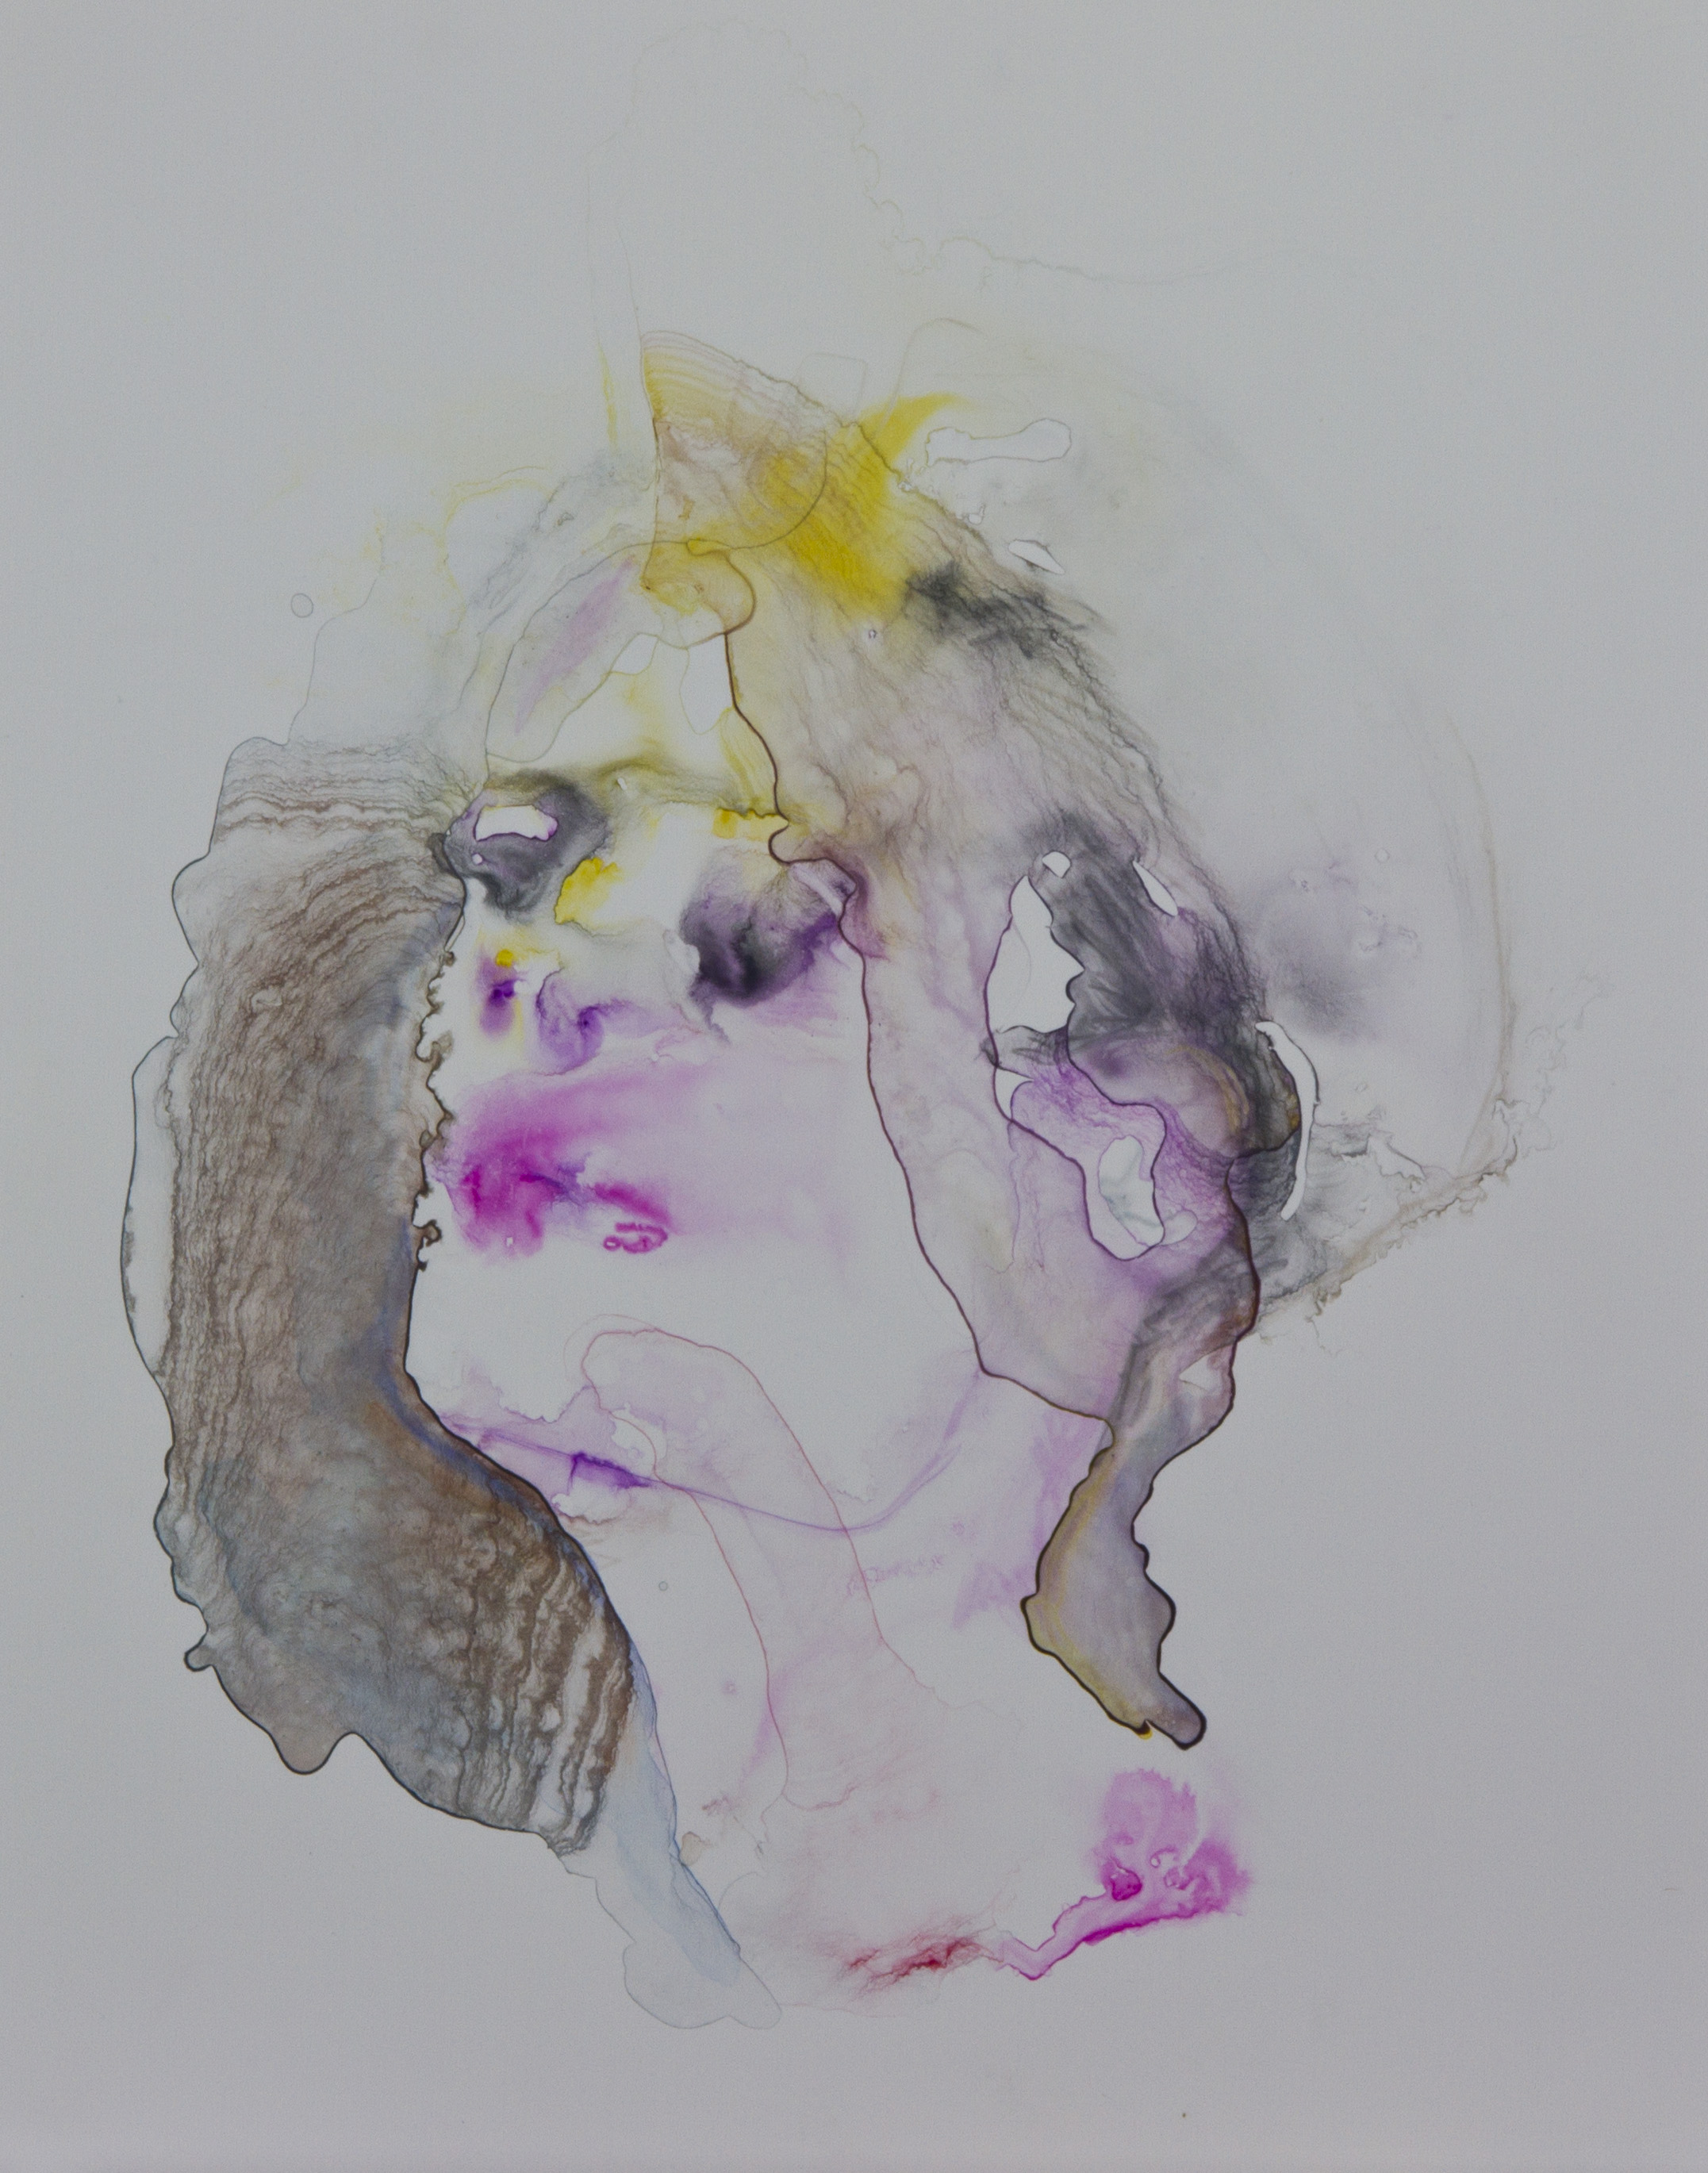 Specimen 10, 2011, watercolor on polypropylene, 11x14 inches